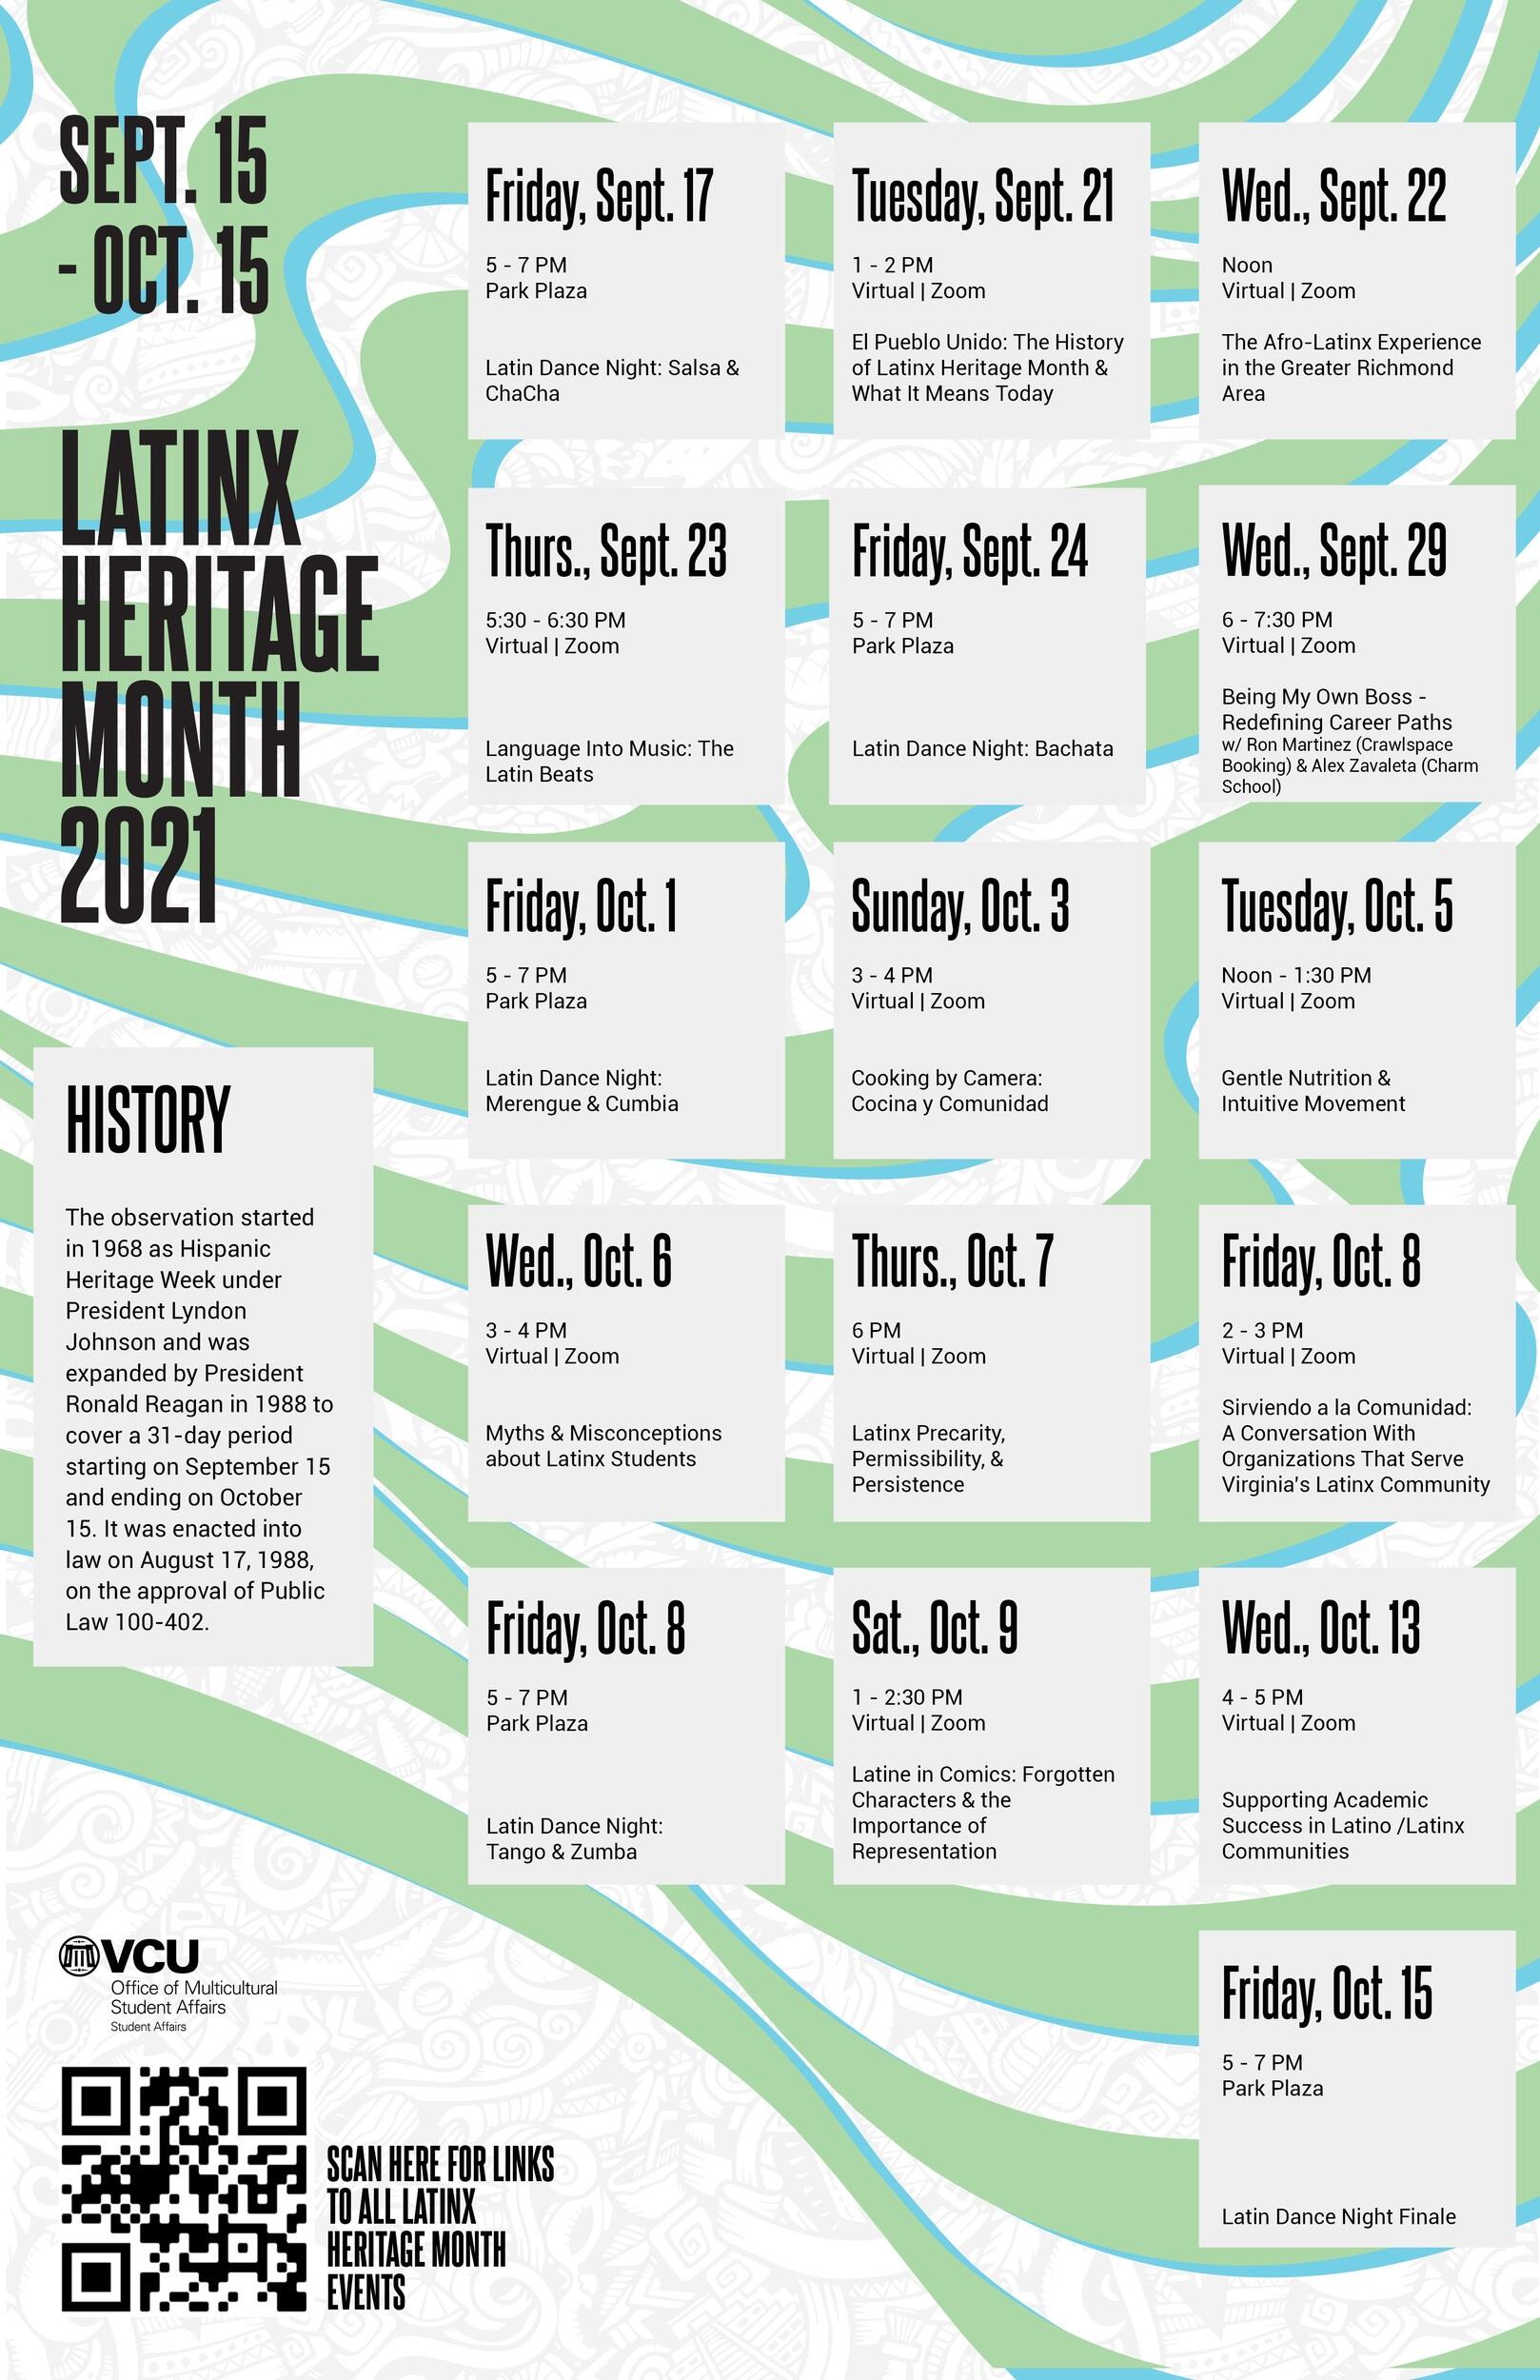 Latinx Heritage Month Events: Latin dance night: Salsa and chacha Friday, Sept. 17, 5-7 p.m., Park Plaza El pueblo unido: The history of Latinx Heritage Month and what it means today Tuesday, Sept. 21, 1-2 p.m., Zoom The Afro-Latinx experience in the greater Richmond area Wednesday, Sept. 22, Noon, Zoom Language into music: The Latin beats Thursday, Sept. 23, 5:30-6:30 p.m., Zoom Latin dance night: Bachata Friday, Sept. 24, 5-7 p.m., Park Plaza Being my own boss: Redefining career paths with Ron Martinez of Crawlspace Booking and Alex Zavaleta of Charm School Wednesday, Sept. 29, 6-7:30 p.m., Zoom Latin dance night: Merengue and cumbia Friday, Oct. 1, 5-7 p.m., Park Plaza Cooking by camera: Cocina y comunidad Sunday, Oct. 3, 3-4 p.m., Zoom Gentle nutrition and intuitive movement Tuesday, Oct. 5, Noon-1:30 p.m., Zoom Myths and misconceptions about Latinx students Wednesday, Oct. 6, 3-4 p.m., Zoom Latinx precarity, permissibility and persistence Thursday, Oct. 7, 6 p.m., Zoom Sirviendo a la comunidad: A conversation with organizations that serve Virginia’s Latinx community Friday, Oct. 8, 2-3 p.m., Zoom Latin dance night: Tango and Zumba Friday, Oct. 8, 5-7 p.m., Park Plaza Latine in comics: Forgotten characters and the importance of representation Saturday, Oct. 9, 1-2:30 p.m., Zoom Supporting academic success in Latino/Latinx communities Wednesday, Oct. 13, 4-5 p.m., Zoom Latin dance night finale Friday, Oct. 15, 5-7 p.m., Park Plaza